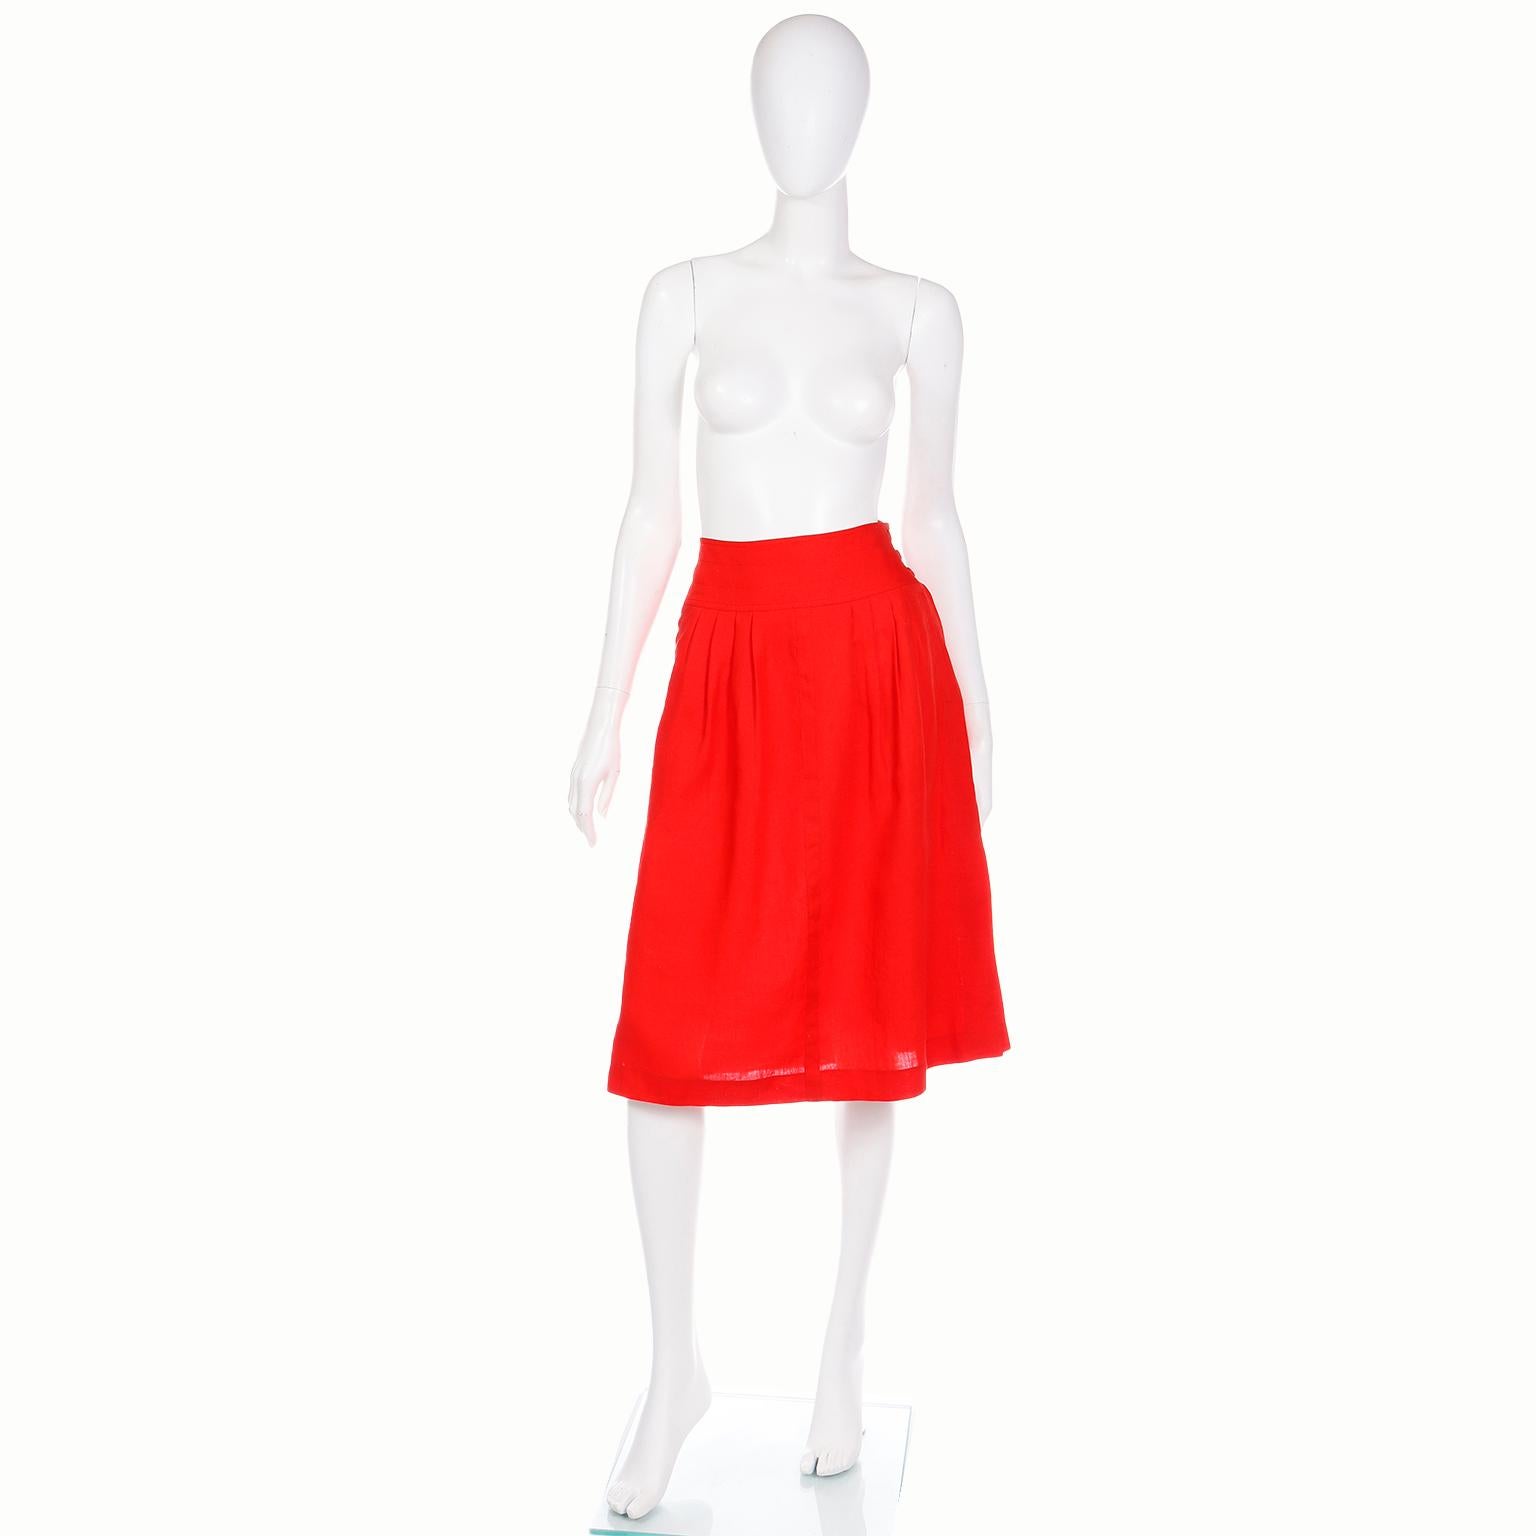 This vintage G. Gucci red linen skirt is a great designer separate to add to any wardrobe. Pieces like these are made so well in such high quality fabric that they instantly elevate your closet. Made In Italy, the skirt is in a medium weight, opaque